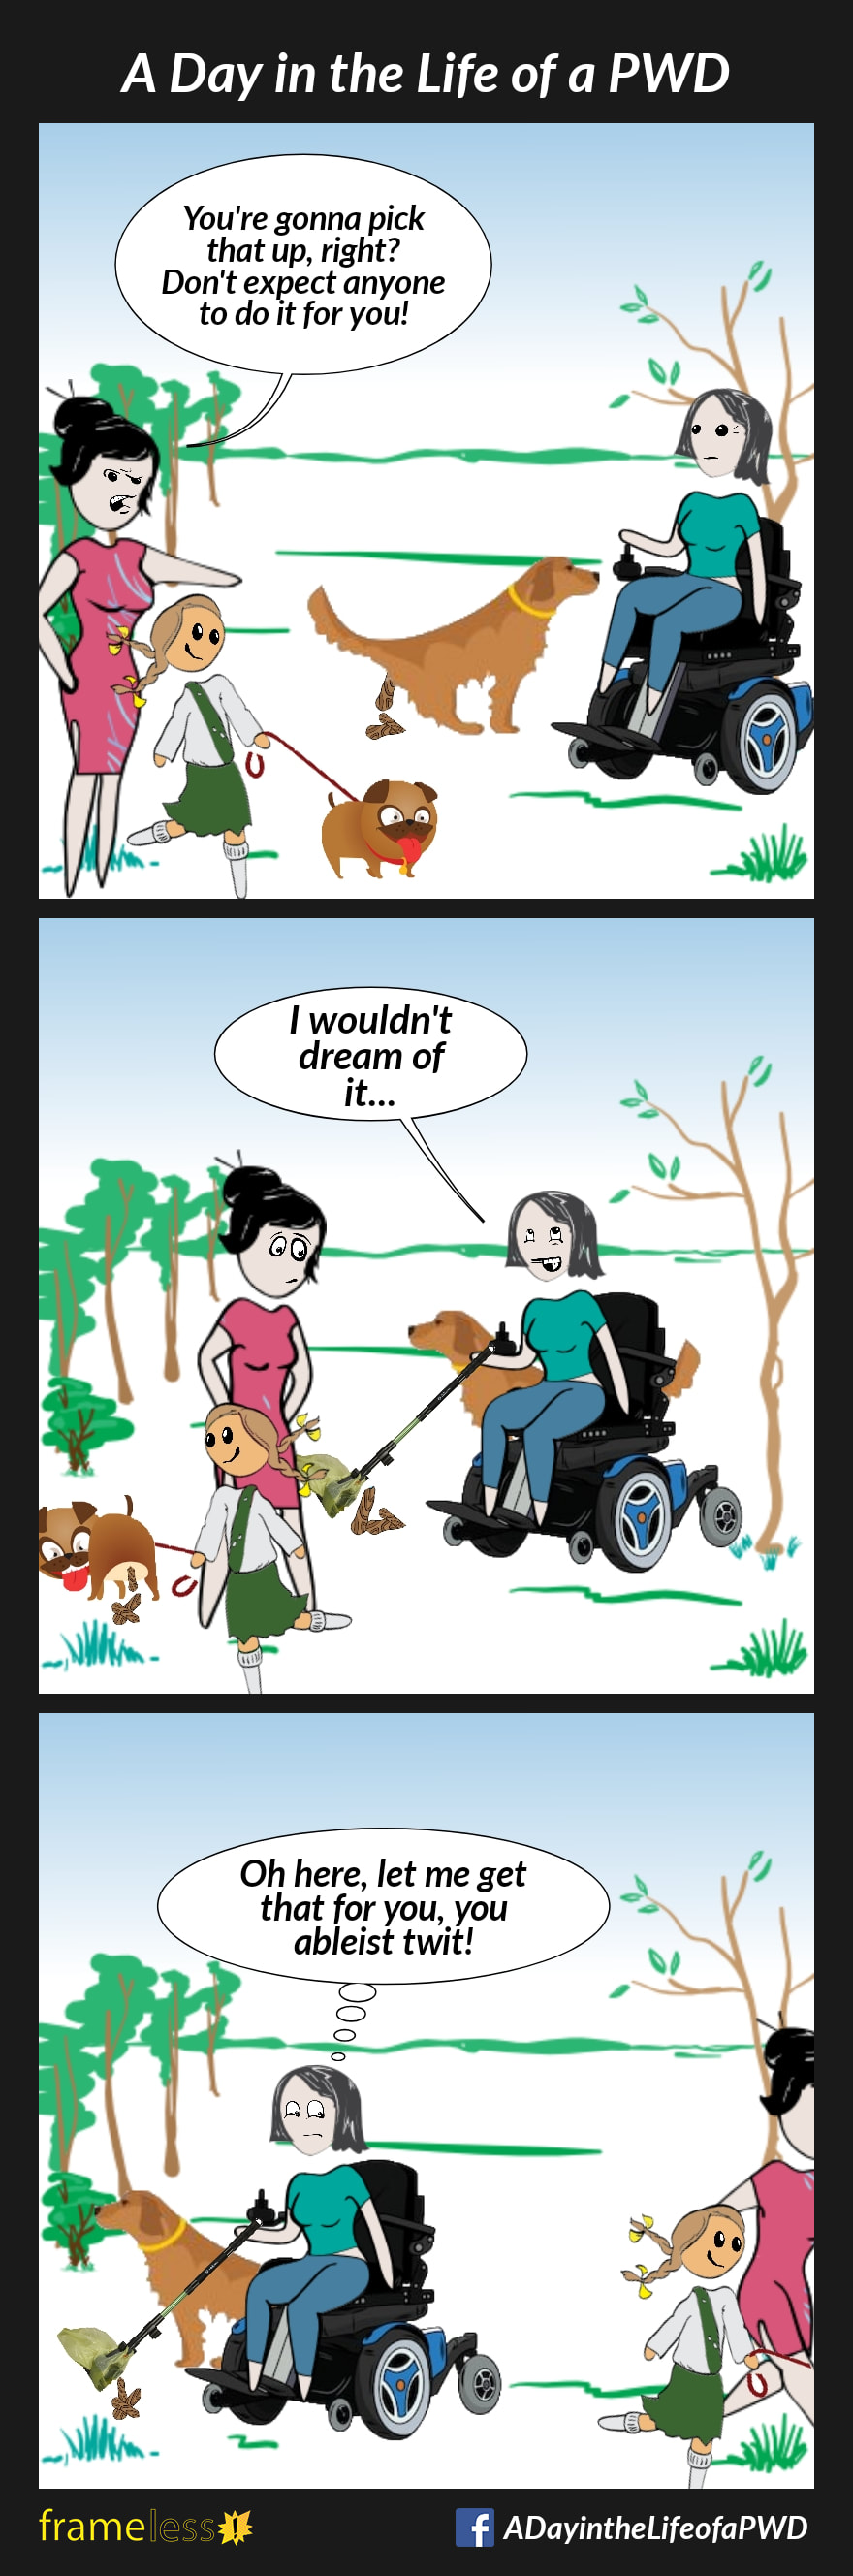 COMIC STRIP 
A Day in the Life of a PWD (Person With a Disability) 

Frame 1:
A woman in a power wheelchair is in the park with her dog. The dog is pooping.
A mother and her daughter are walking their dog nearby. The mother notices the woman's pooping dog.
MOTHER (to woman): You're going to pick that up, right? Don't expect anyone to do it for you!

Frame 2:
The woman pulls out a long handled scooper, and begins to clean up the poop.
WOMAN (smiling and rolling her eyes): I wouldn't dream of it...
Meanwhile, the mother's dog is pooping behind her back.

Frame 3:
The mother and daughter walk away with their dog, leaving their dog's poop behind.
The woman uses her scooper to clean it up.
WONAN (thinking to herself): Oh here, let me get that for you, you ableist twit!